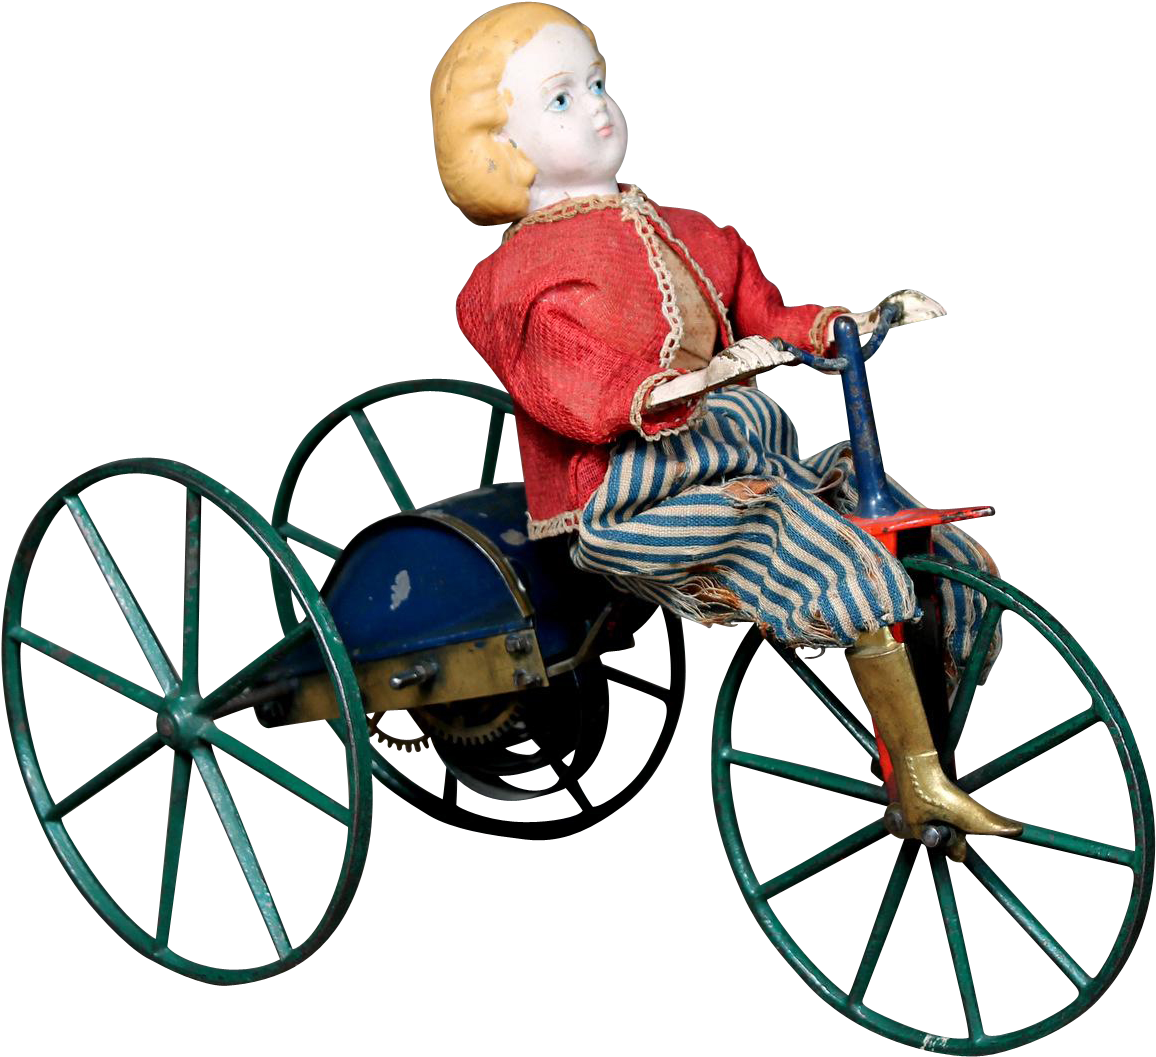 American Patented Mechanical Toy "girl On Velocipede" - Baby (1155x1155)